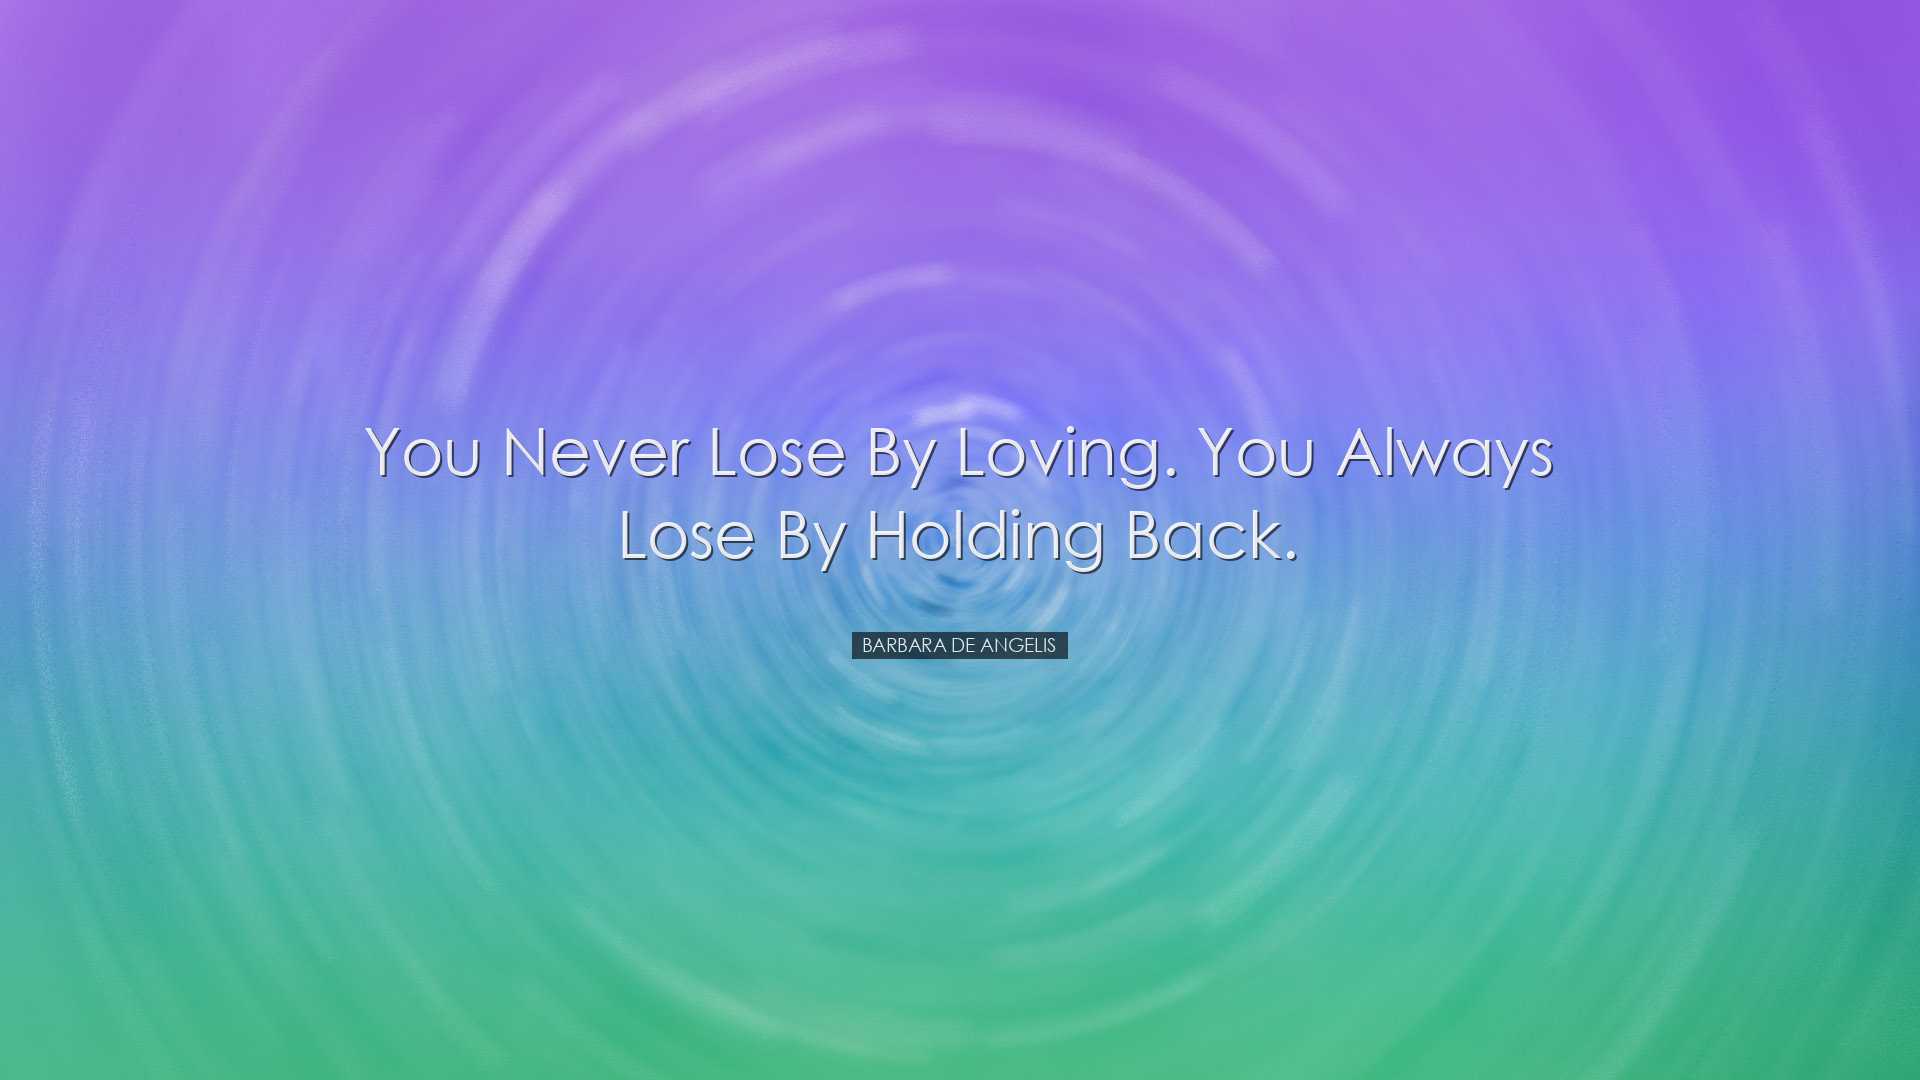 You never lose by loving. You always lose by holding back. - Barba